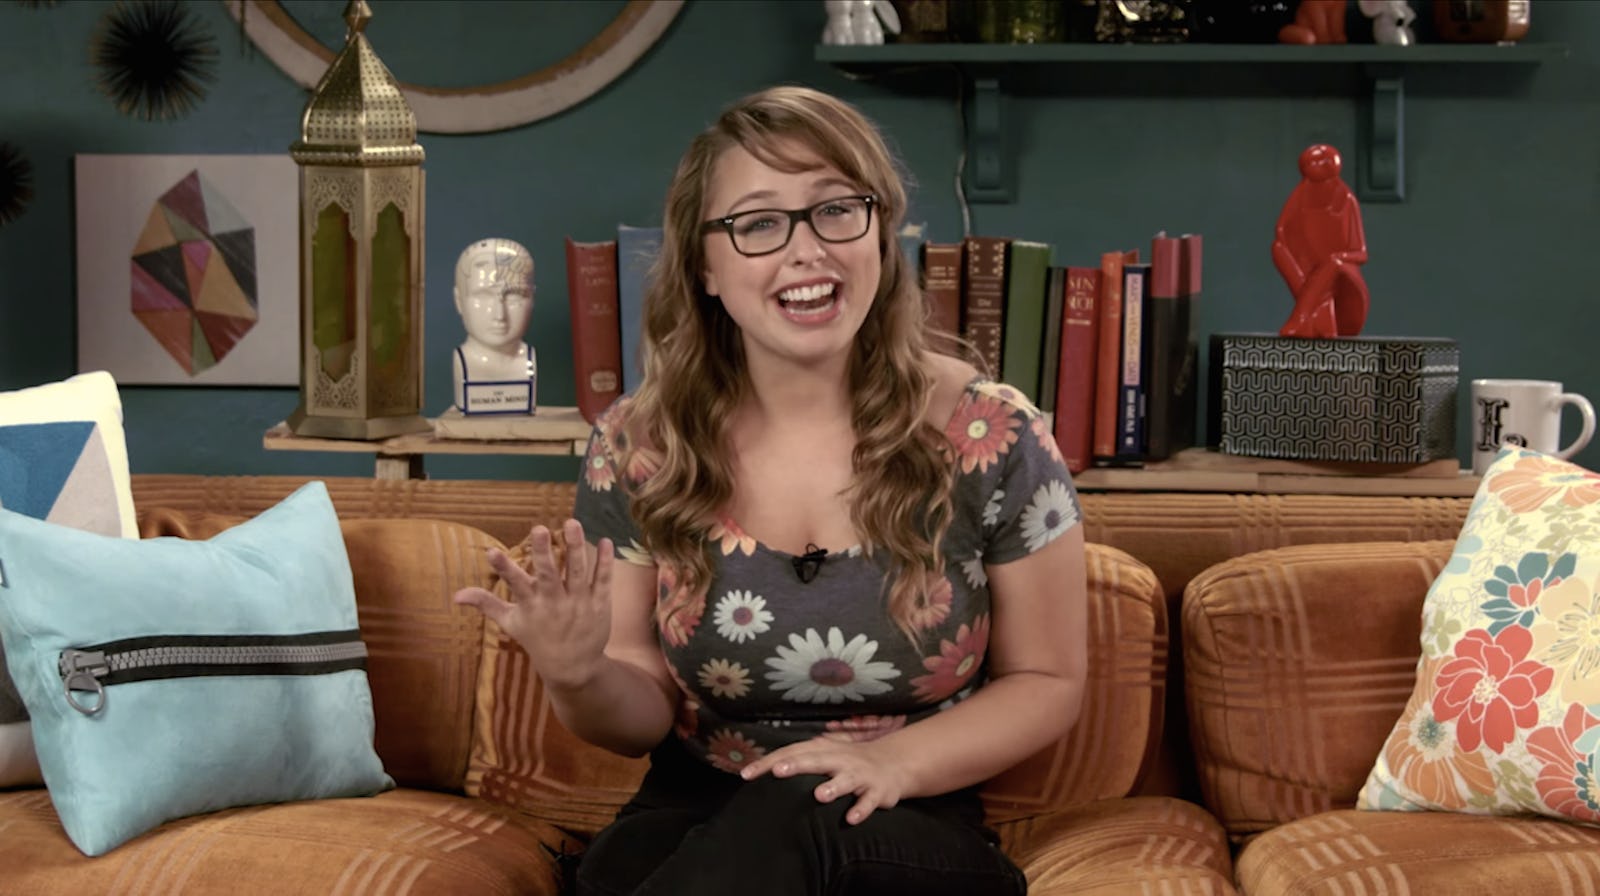 Laci Green Gives Us 7 Feminist Quotes to Live By.